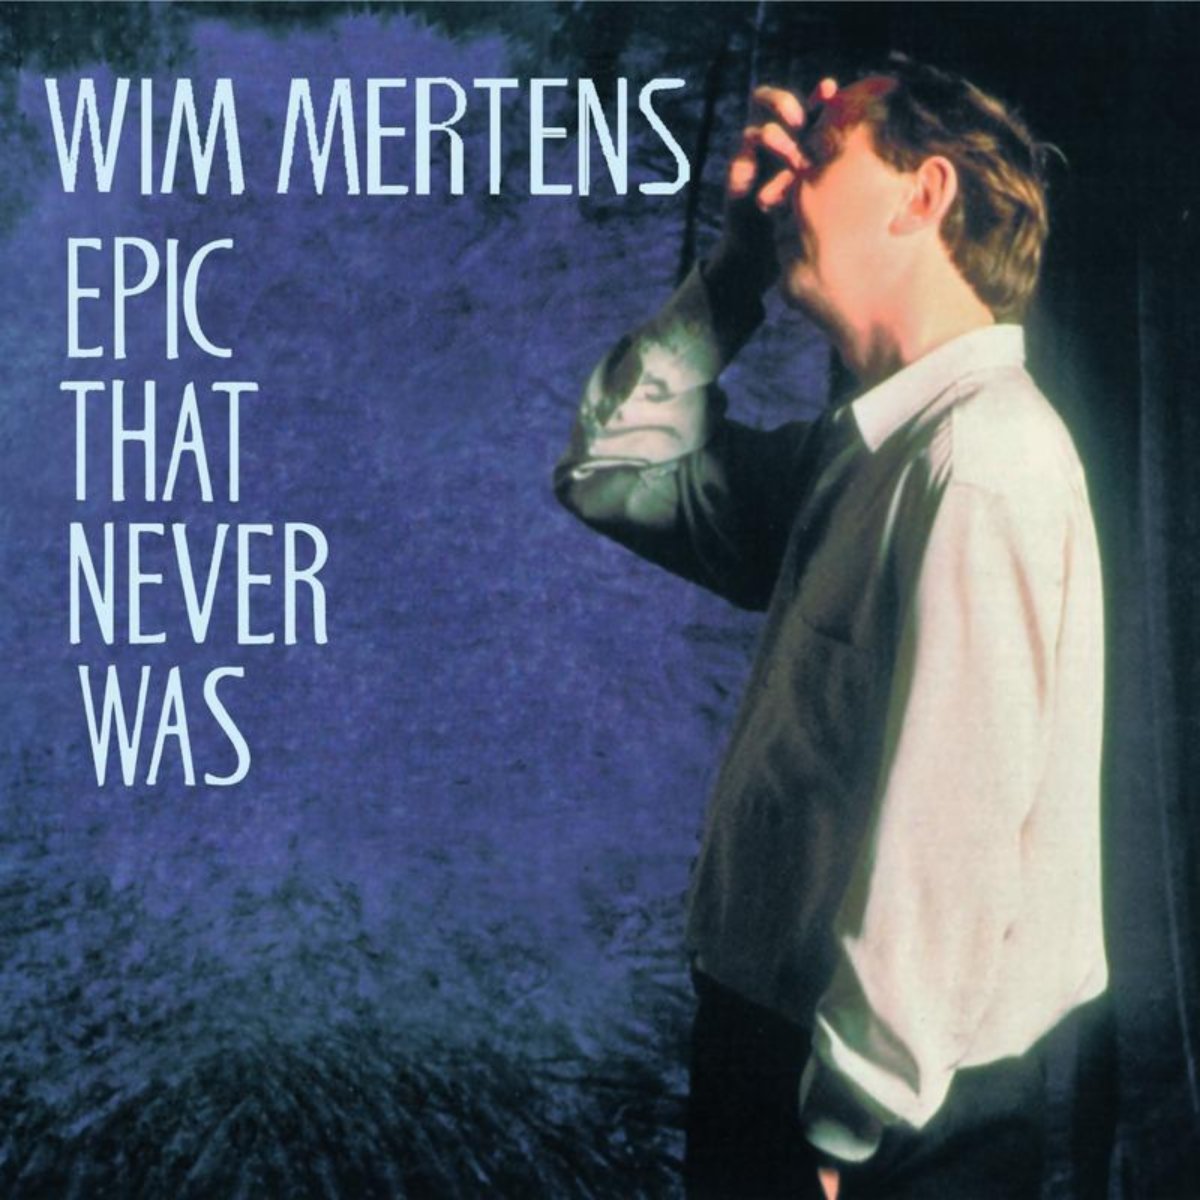 Wim Mertens-Epic That Never Was-REISSUE-CD-FLAC-2001-401